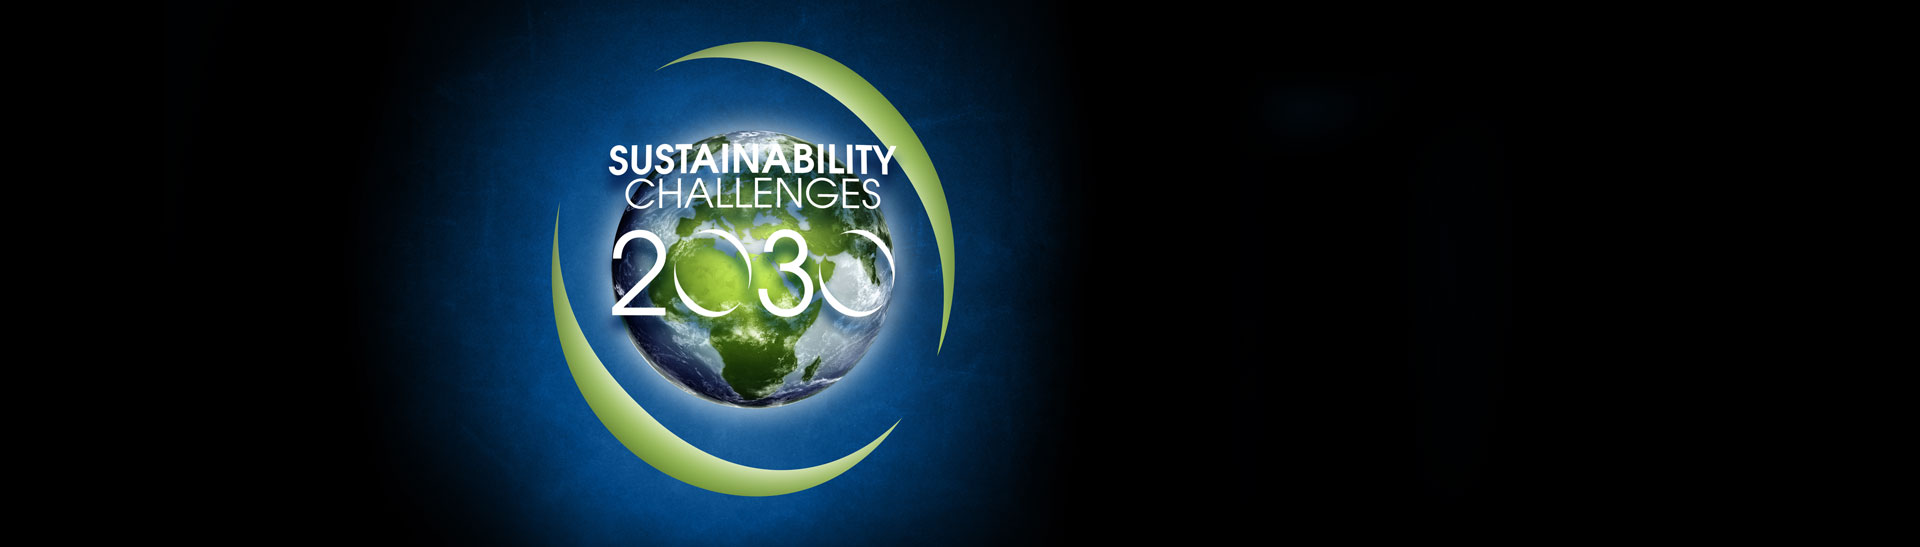 Sustainability Challenges 2030